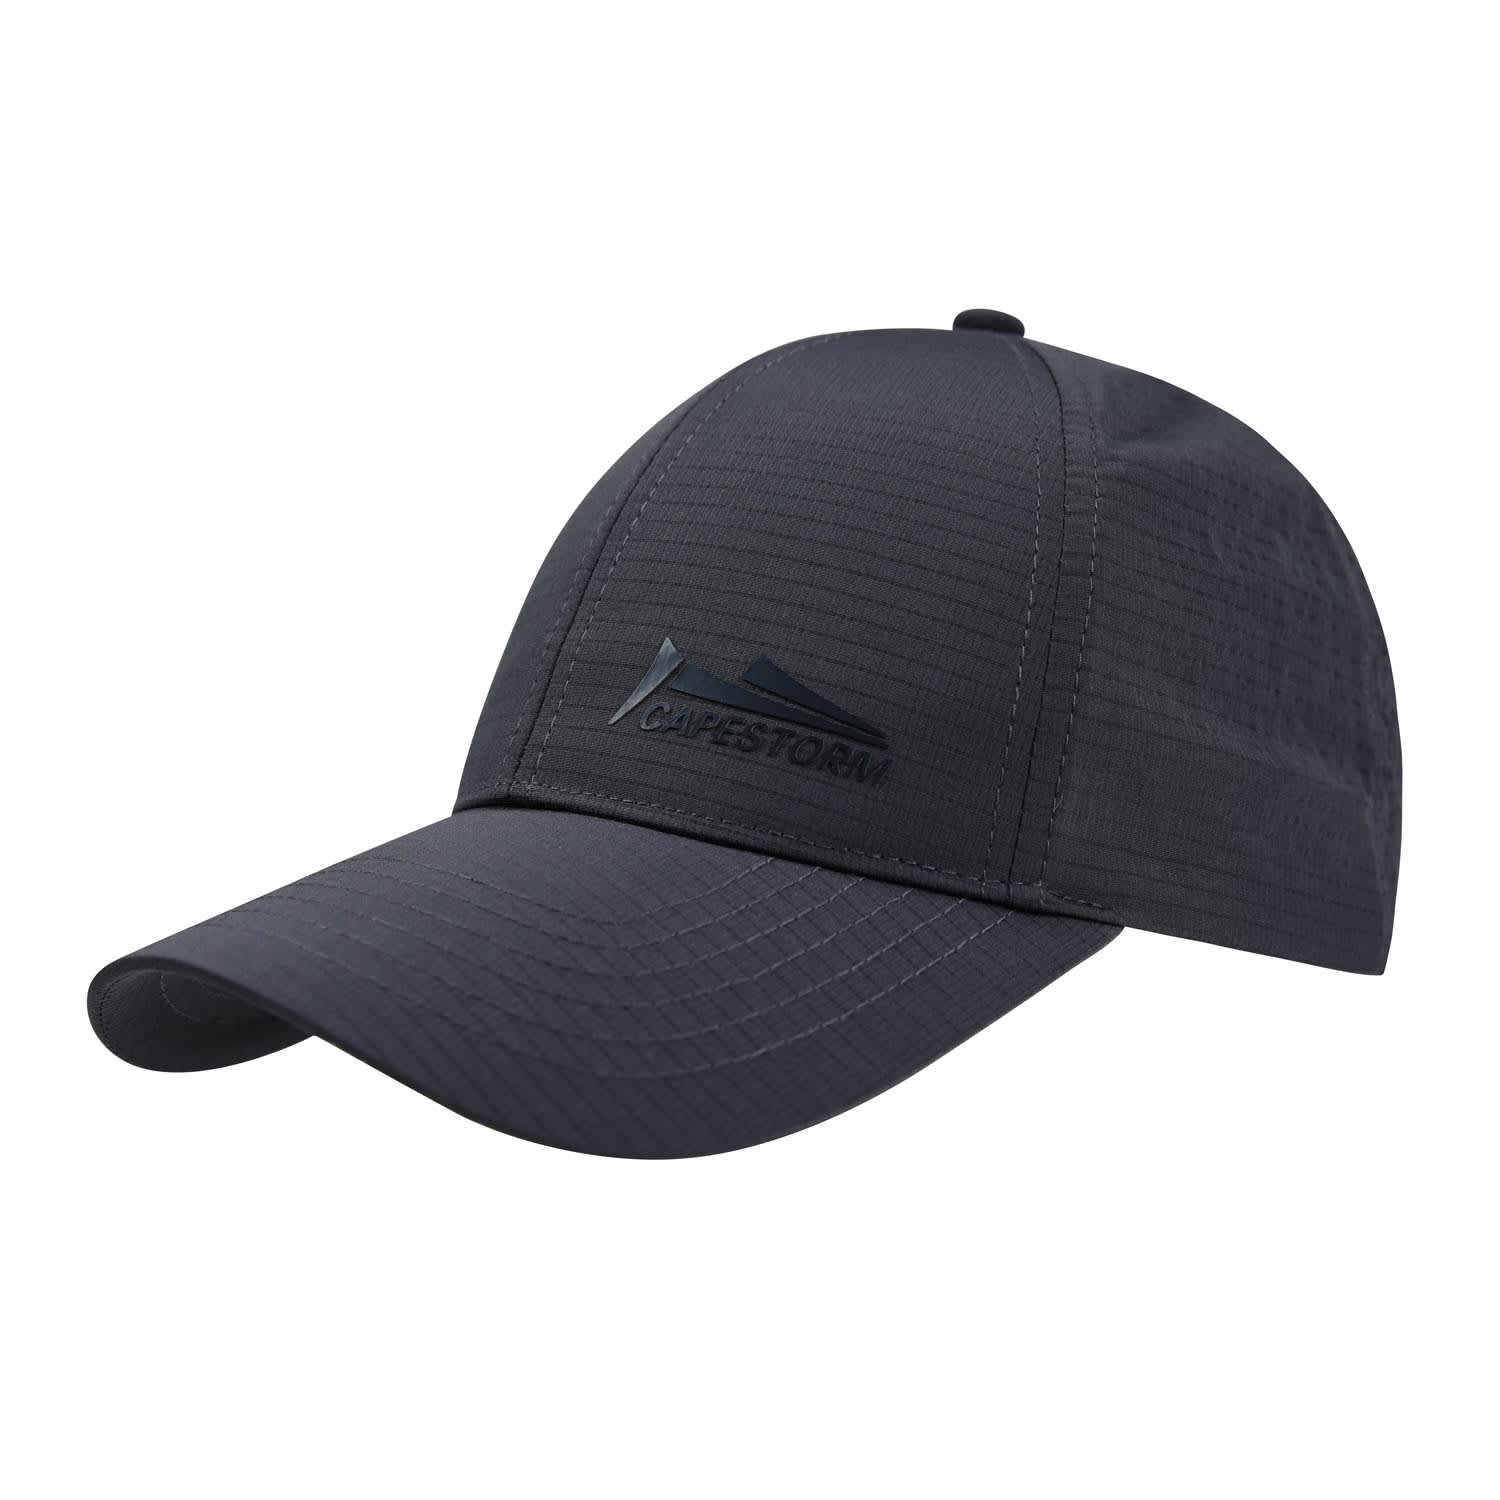 Capestorm  Airspeed Lifestyle Charcoal Cap - default